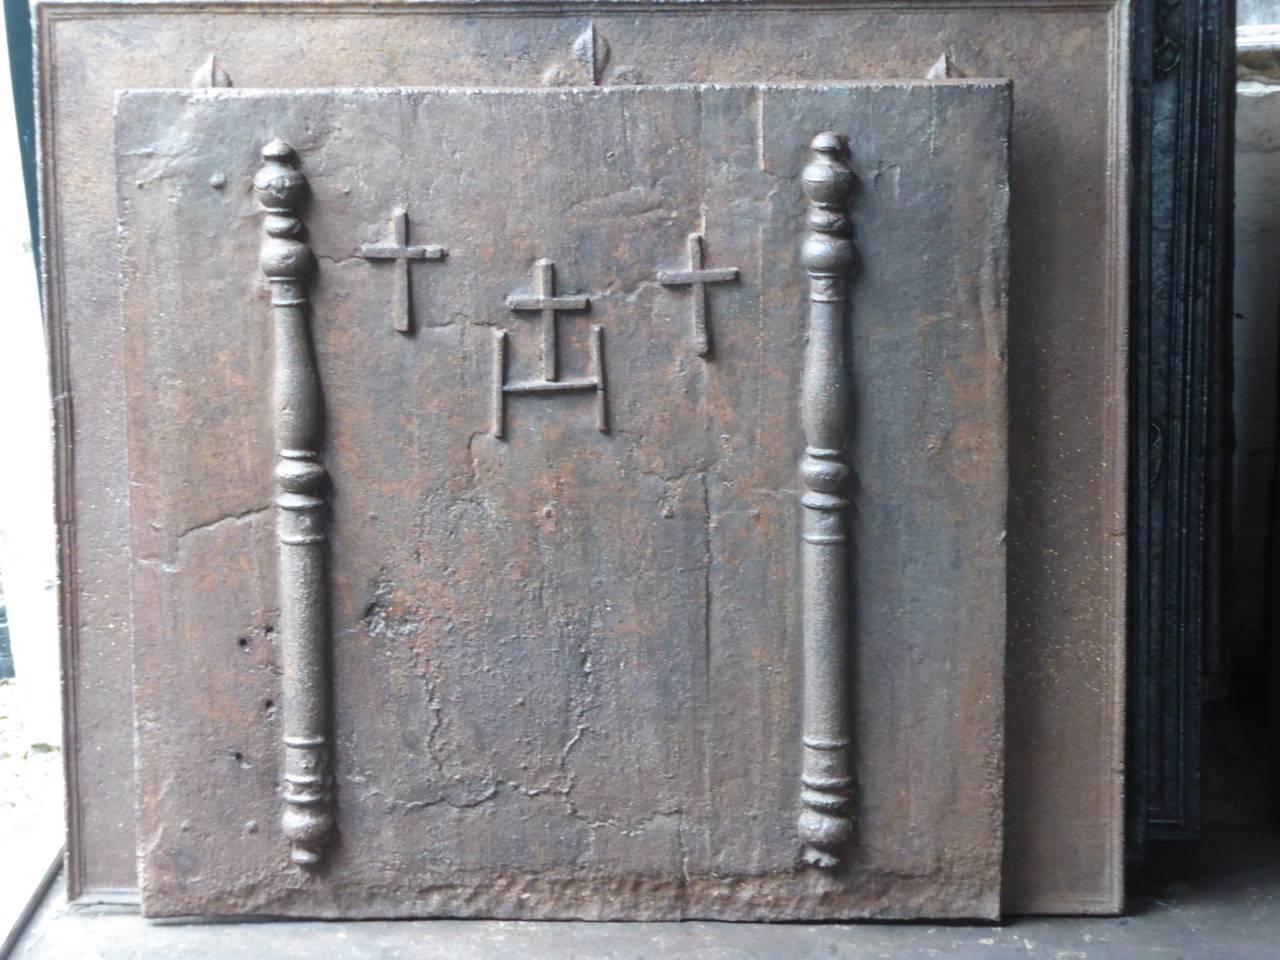 18th century Louis XIV fireplace fireback with two pillars and three crosses.

This product weighs more than 65 kg / 143 lbs. All our products that weigh 66 kg / 146 lbs or more are shipped as standard door-to-door freight. You can contact us to